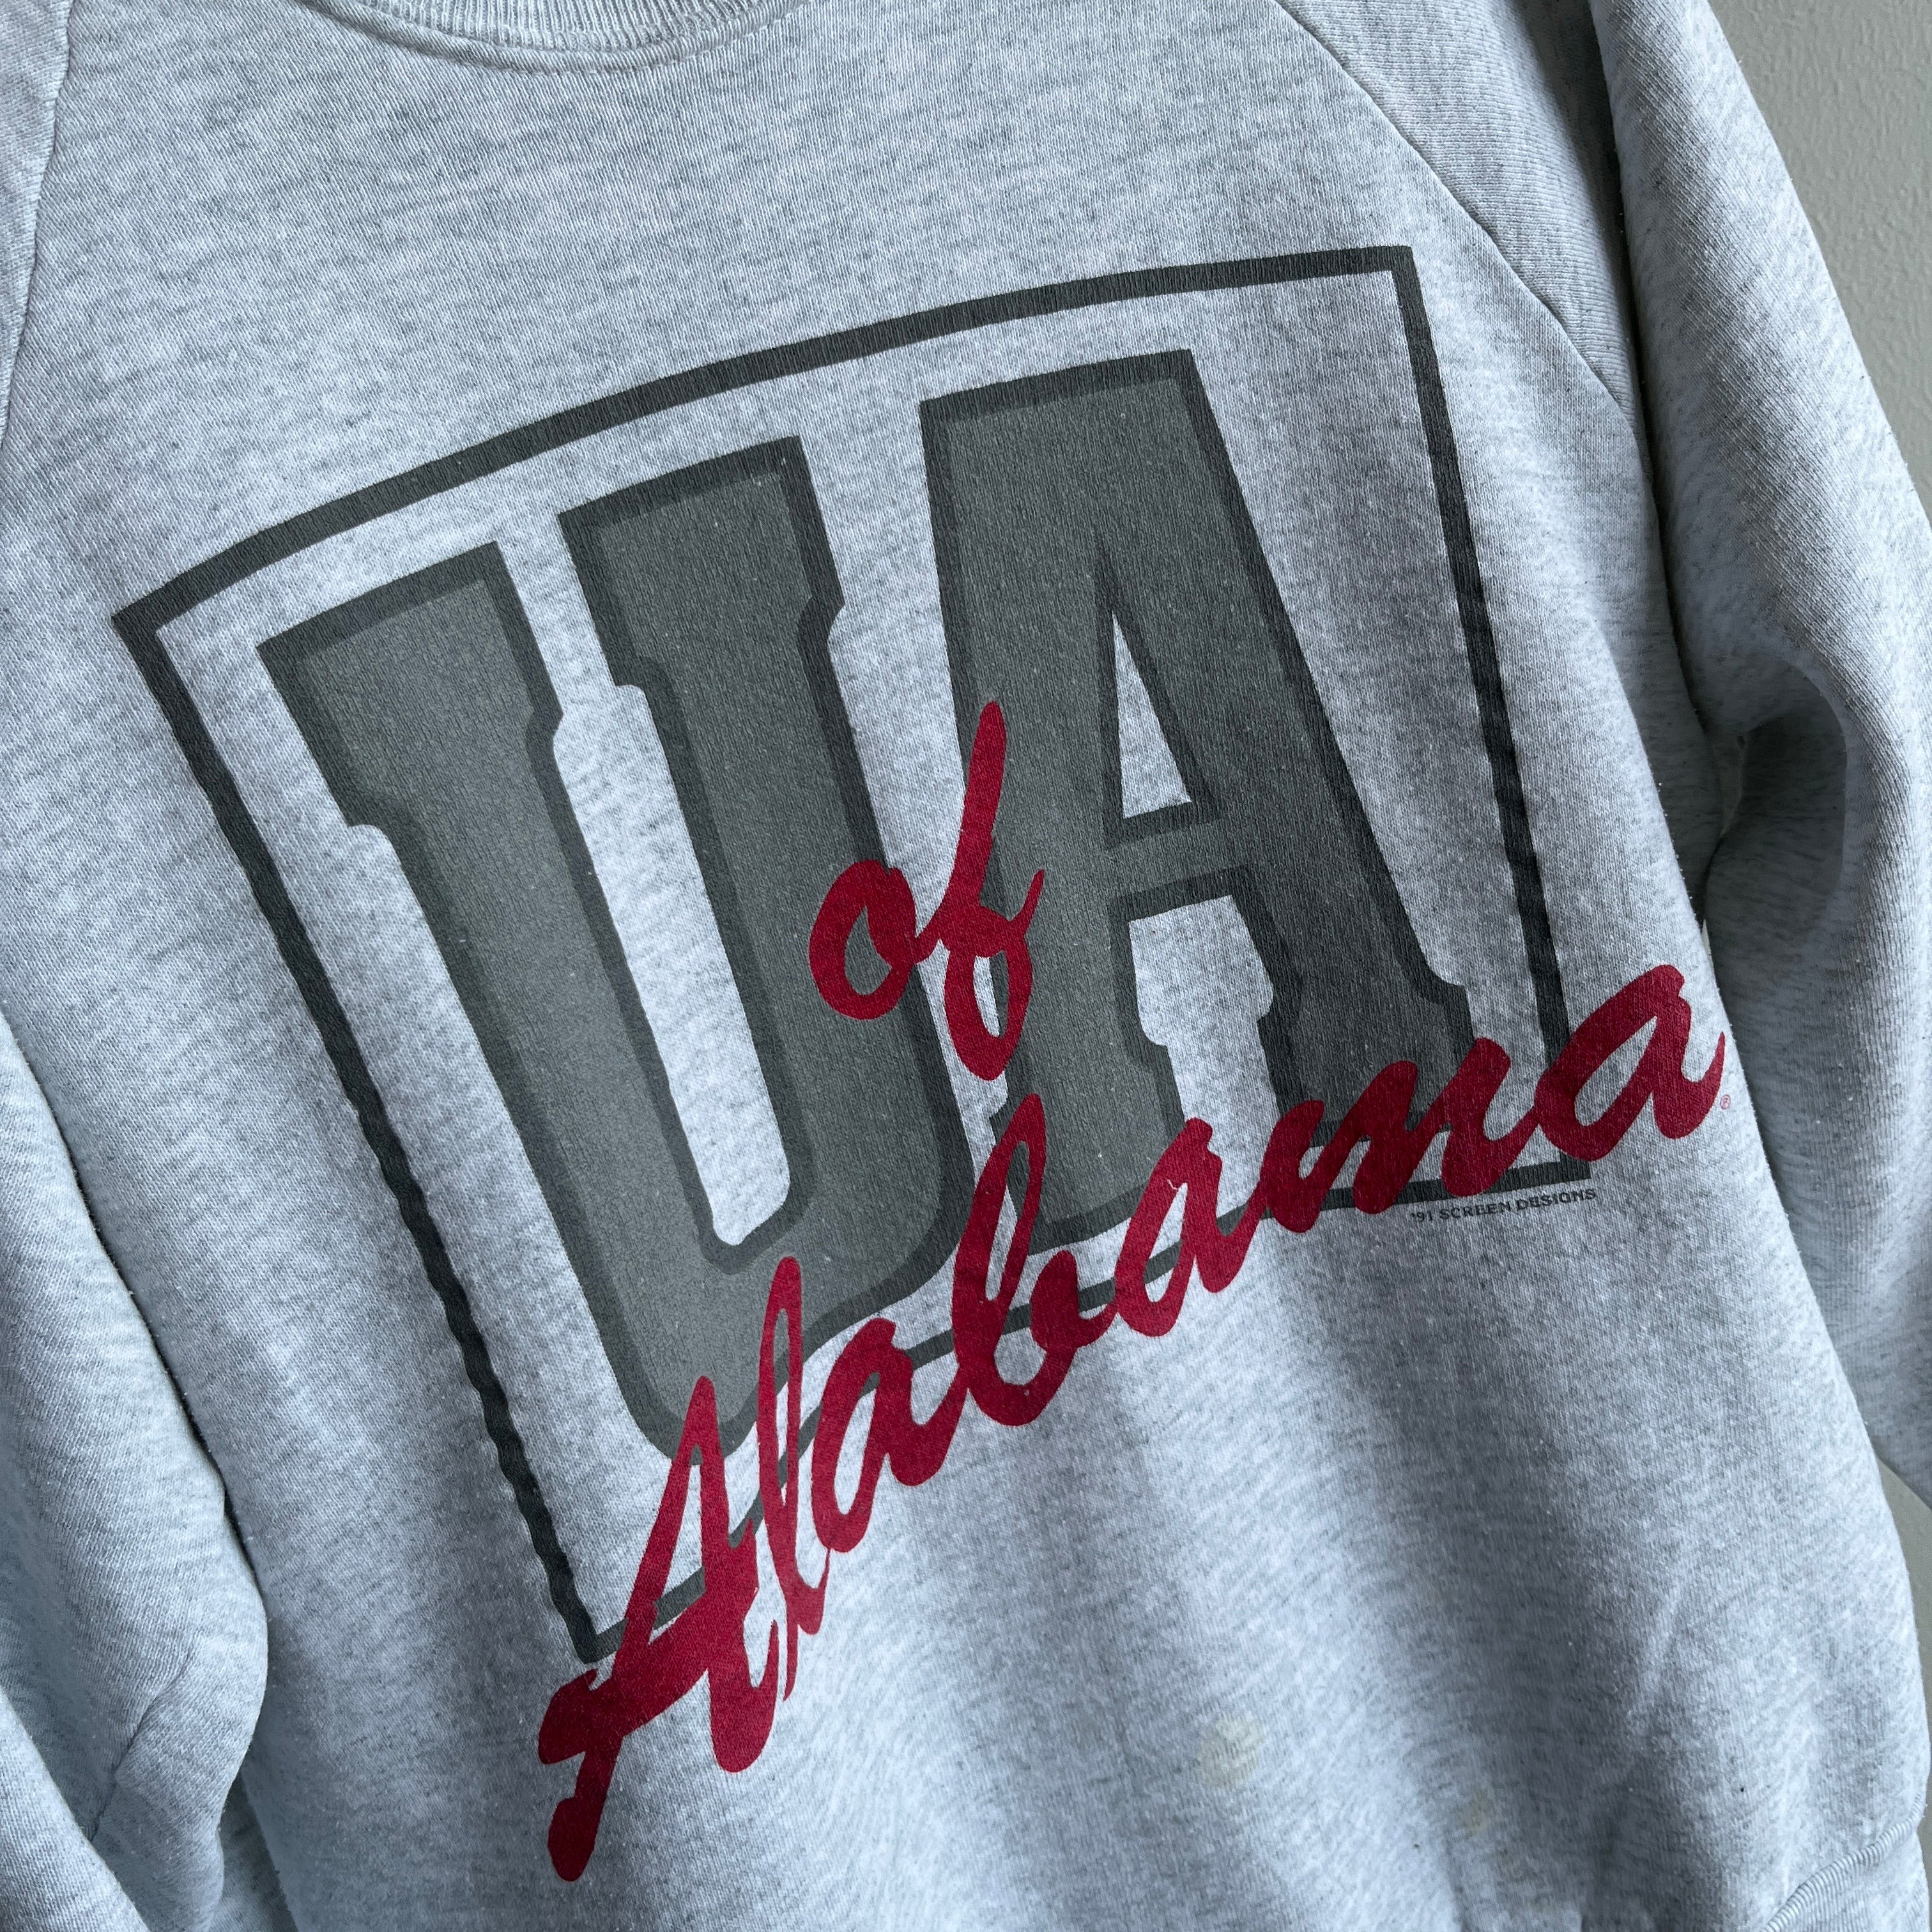 1991  University of Alabama Sweatshirt with Complementary Pit Stains